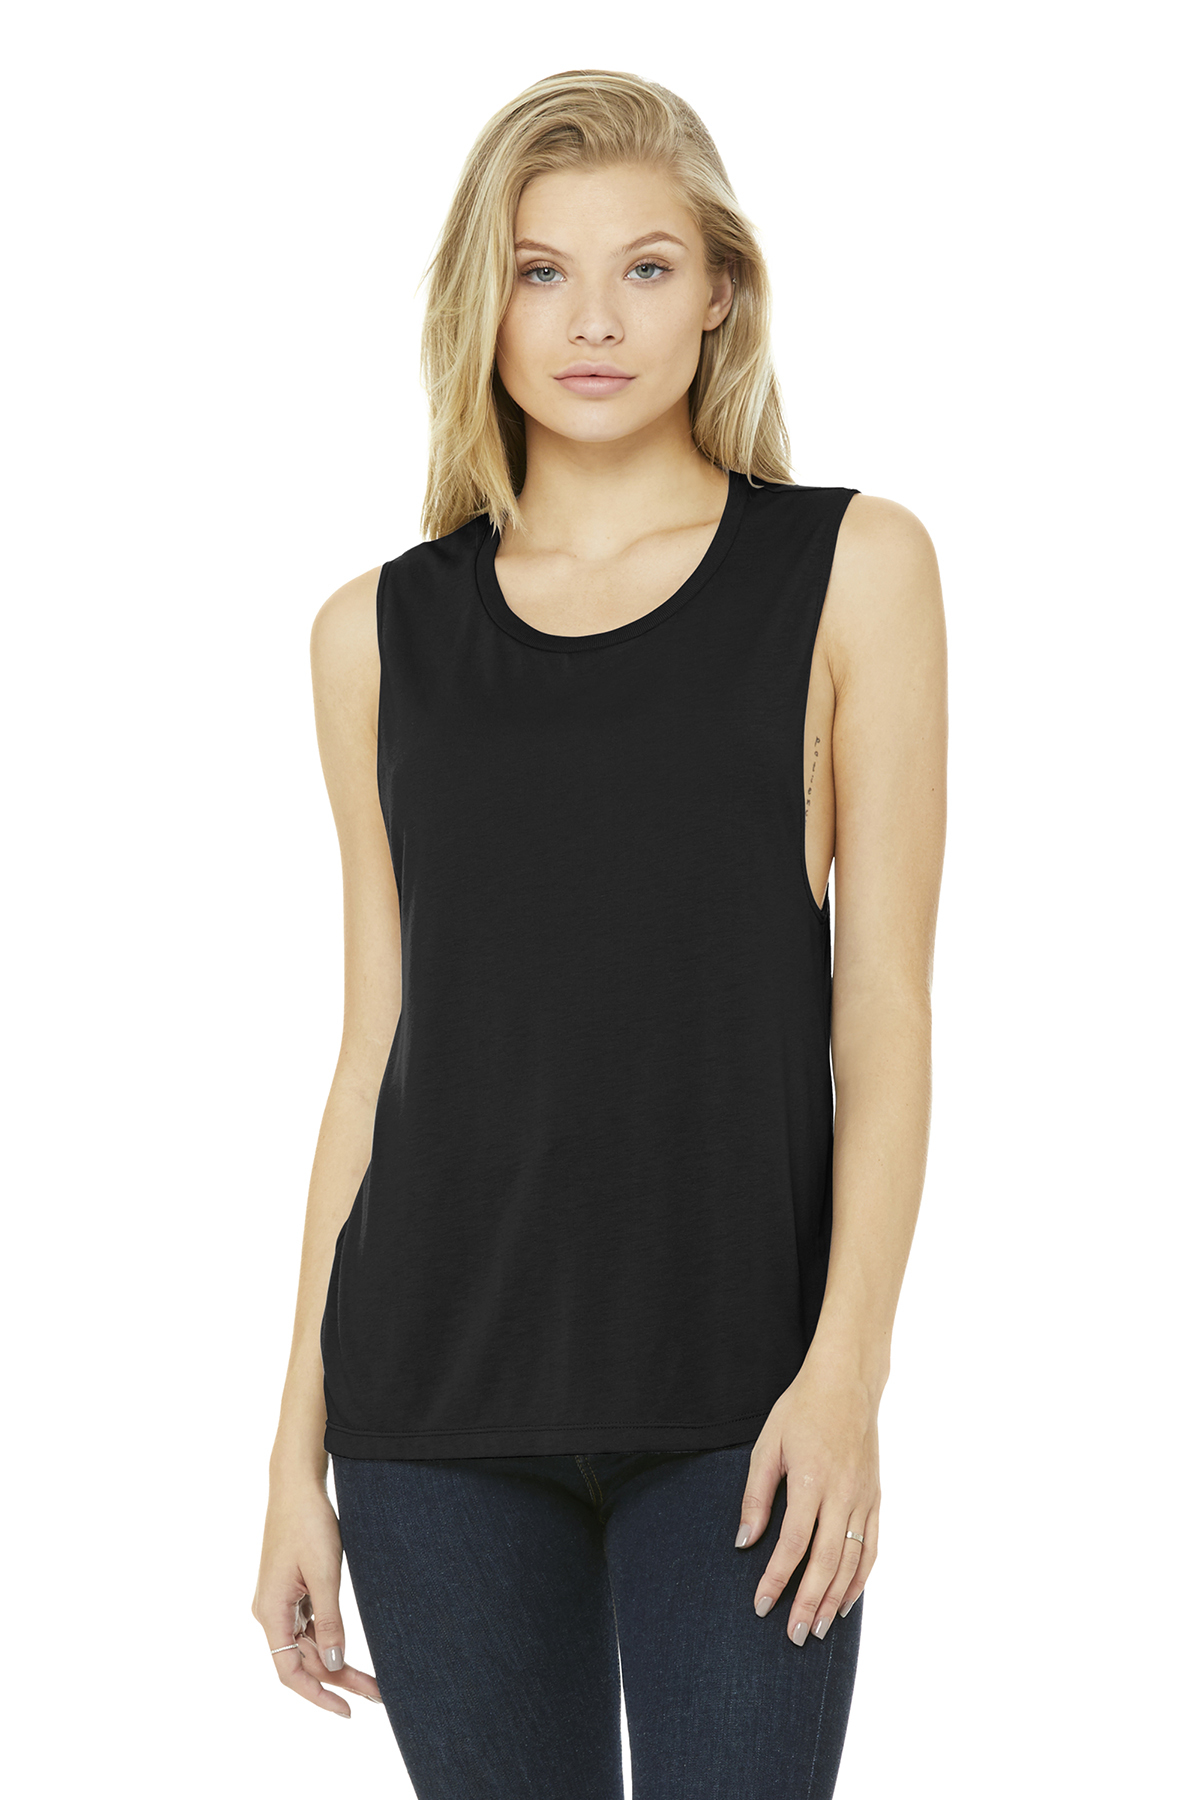 VENOM Scoop Muscle Tank Several Colors Available Women's Flowy Tank Top